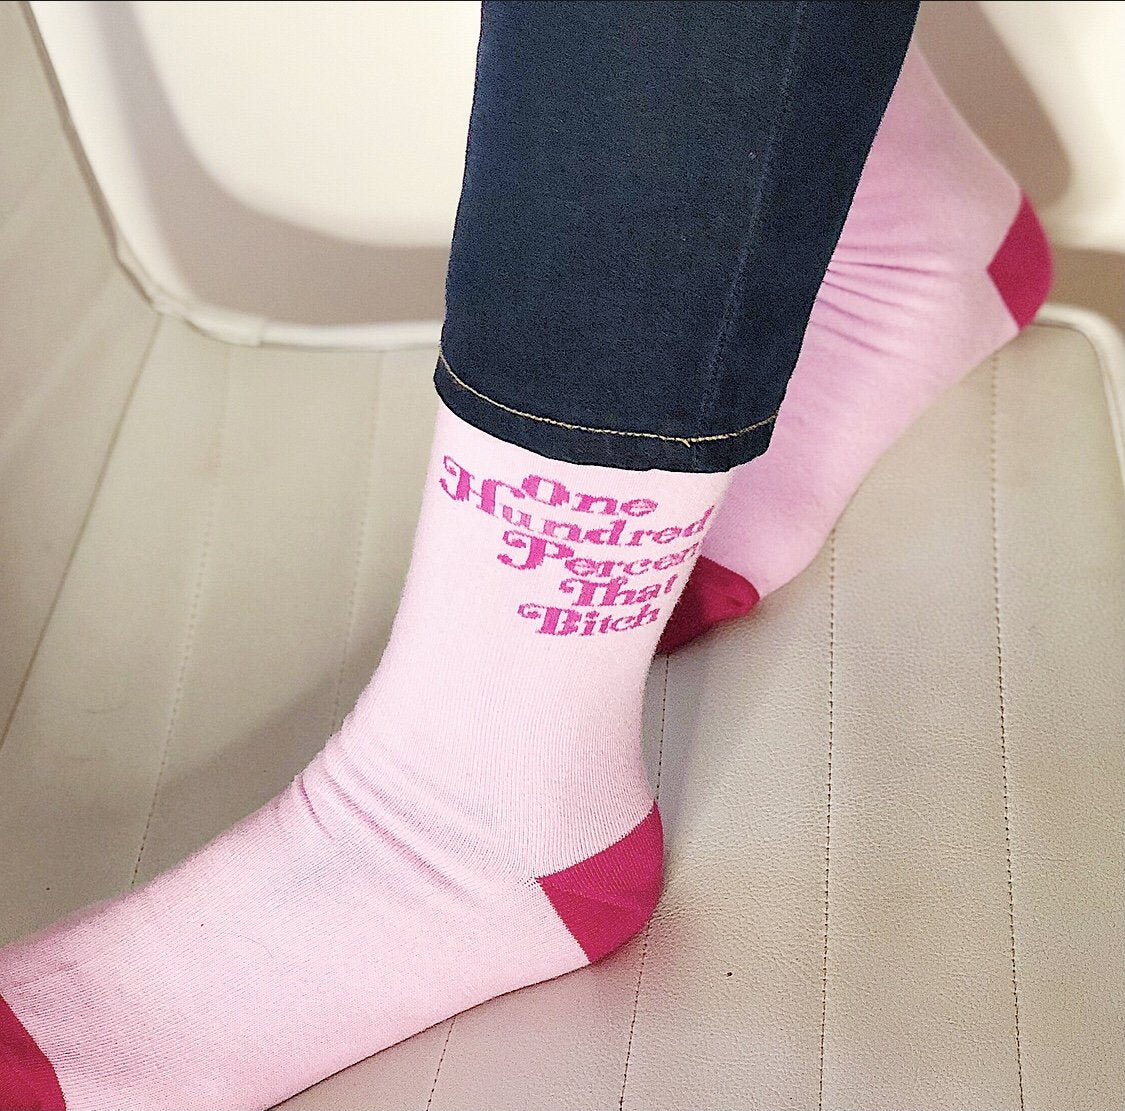 A person's feet wearing pink socks that say 100% that B